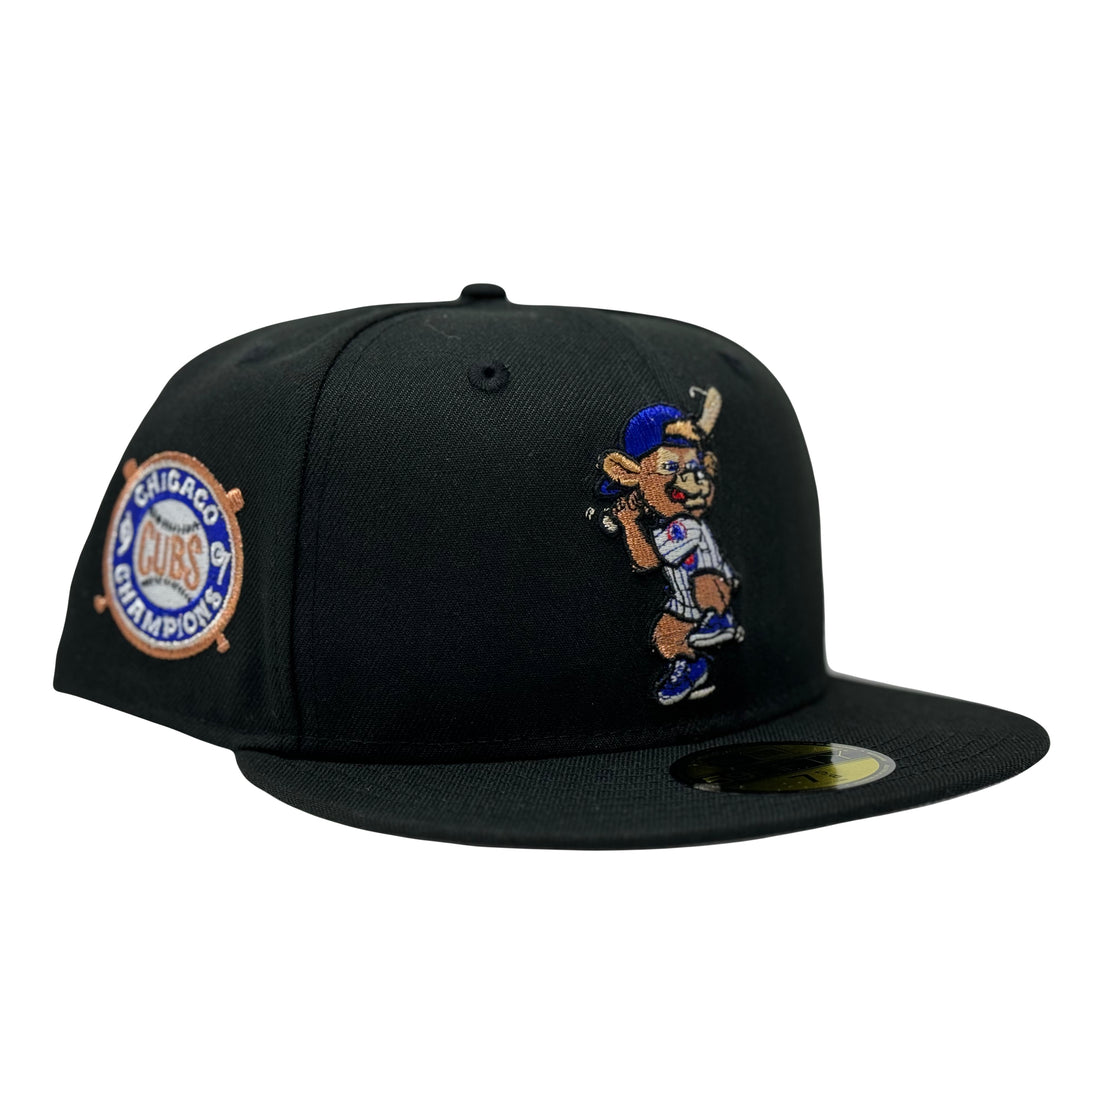 Chicago Cubs 1907 World Series Champions Mascot logo New Era Fitted Hat